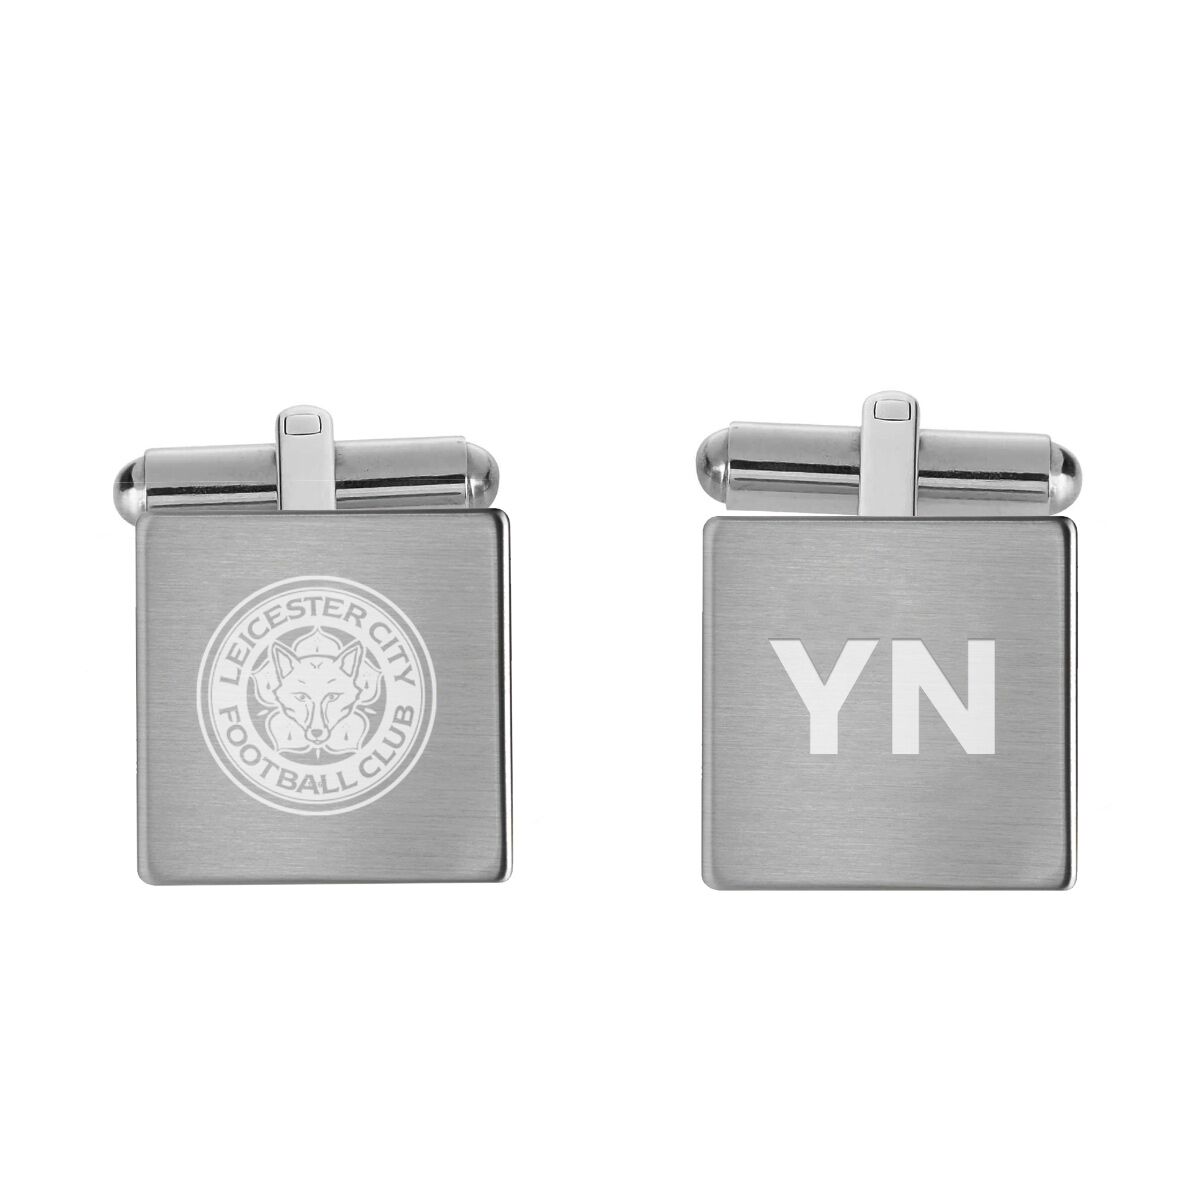 Personalised Leicester City FC Crest Cufflinks